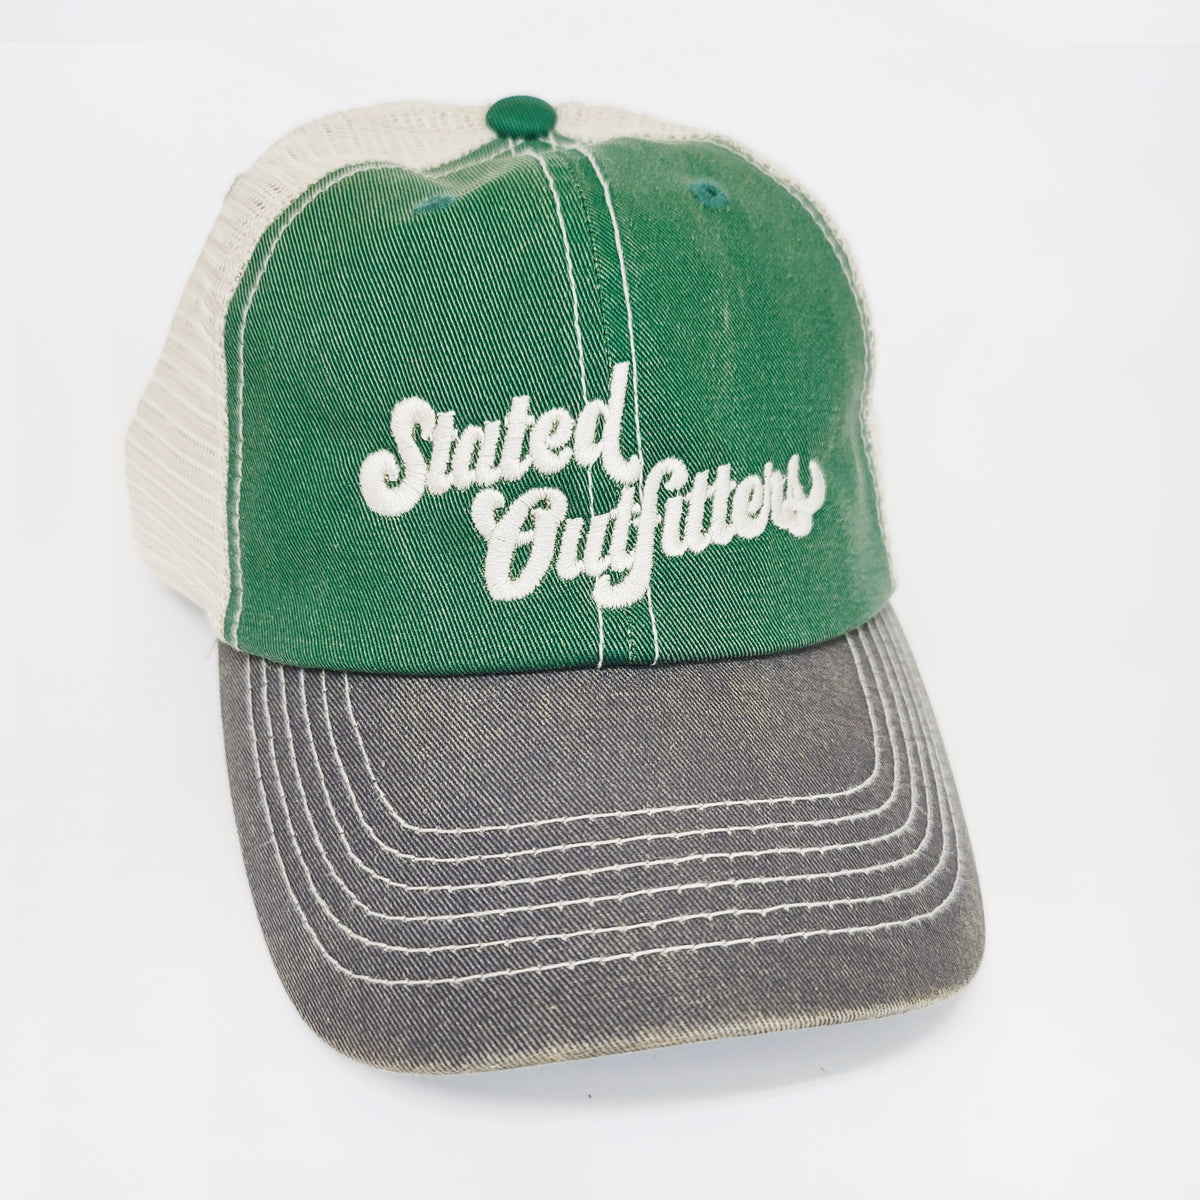 Stated Outfitters Embroidered Green Hat